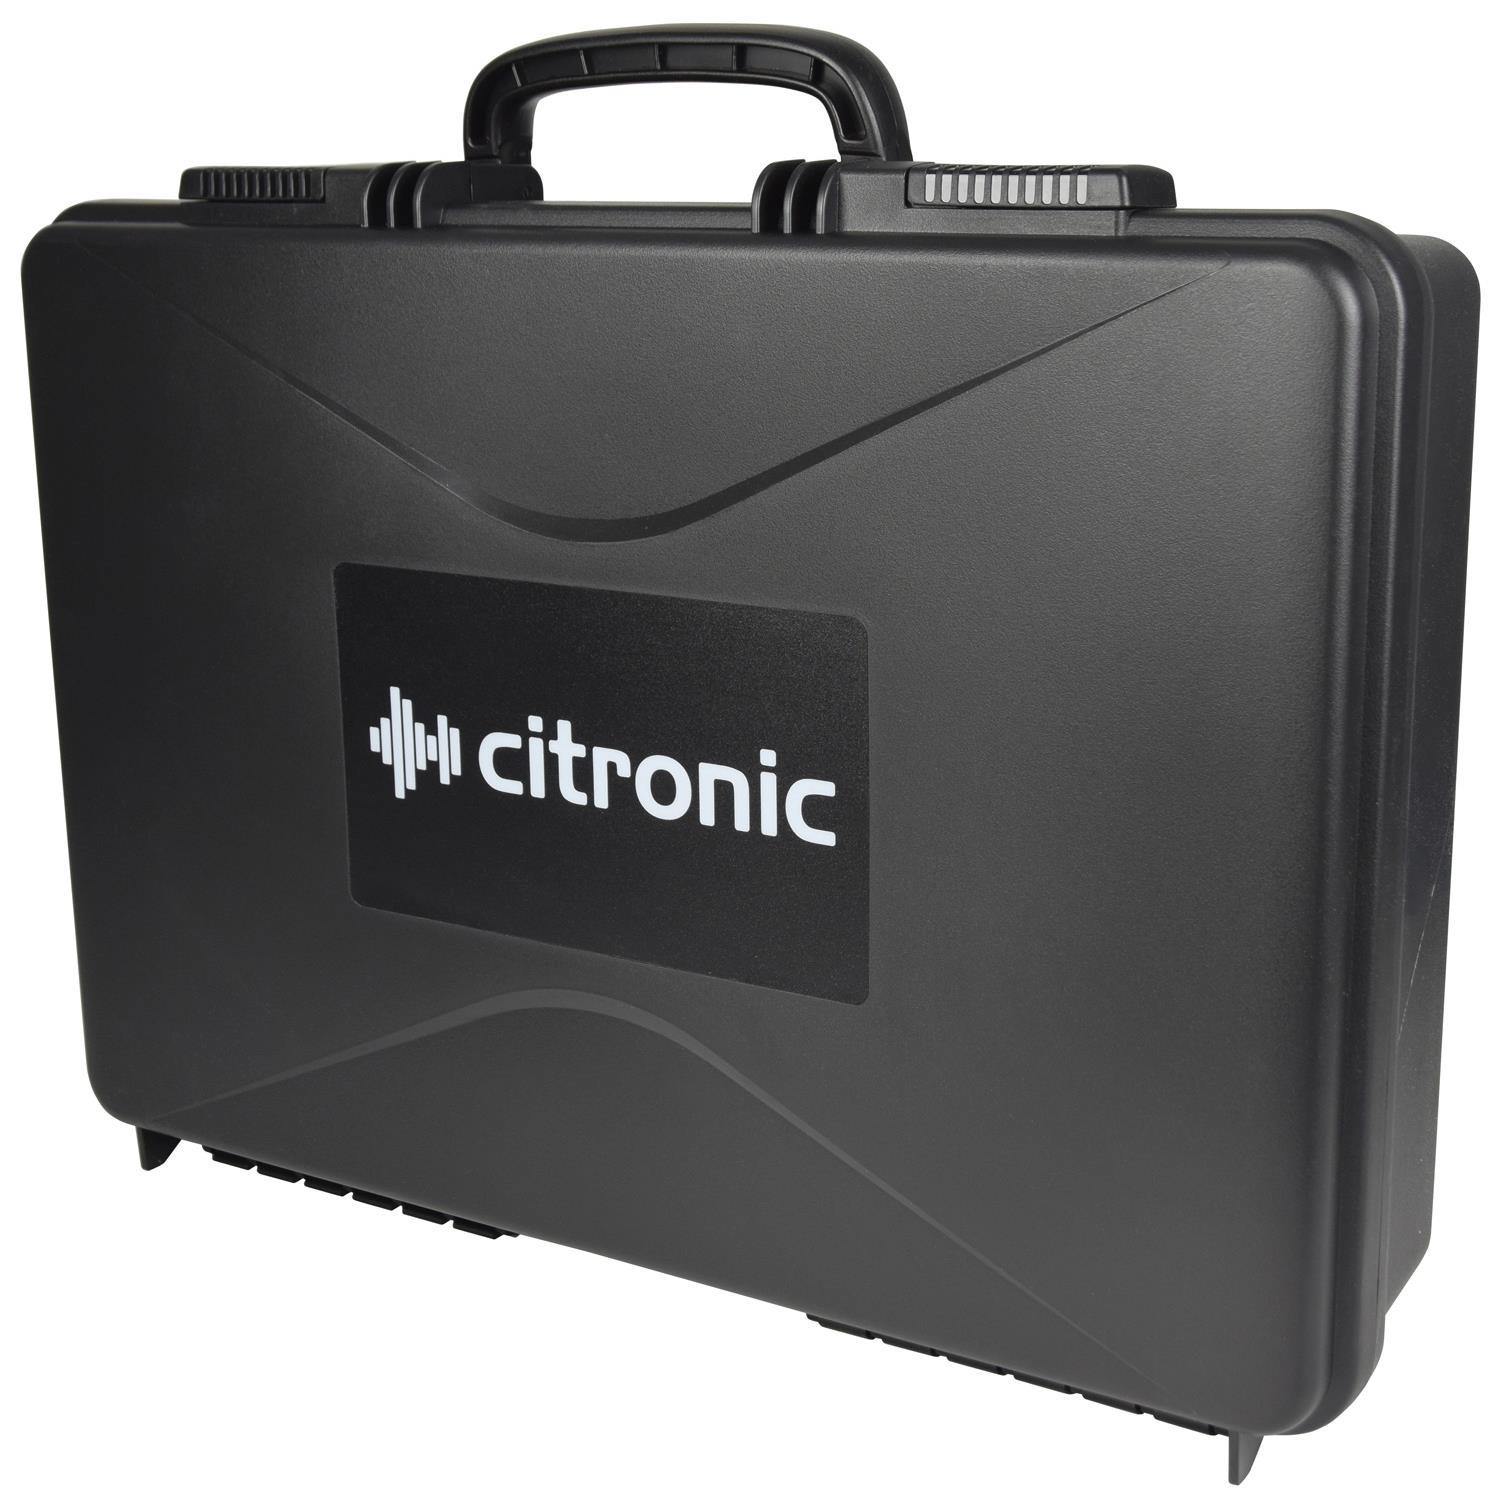 Citronic Small ABS Flightcase for Mixer / Microphone - DY Pro Audio